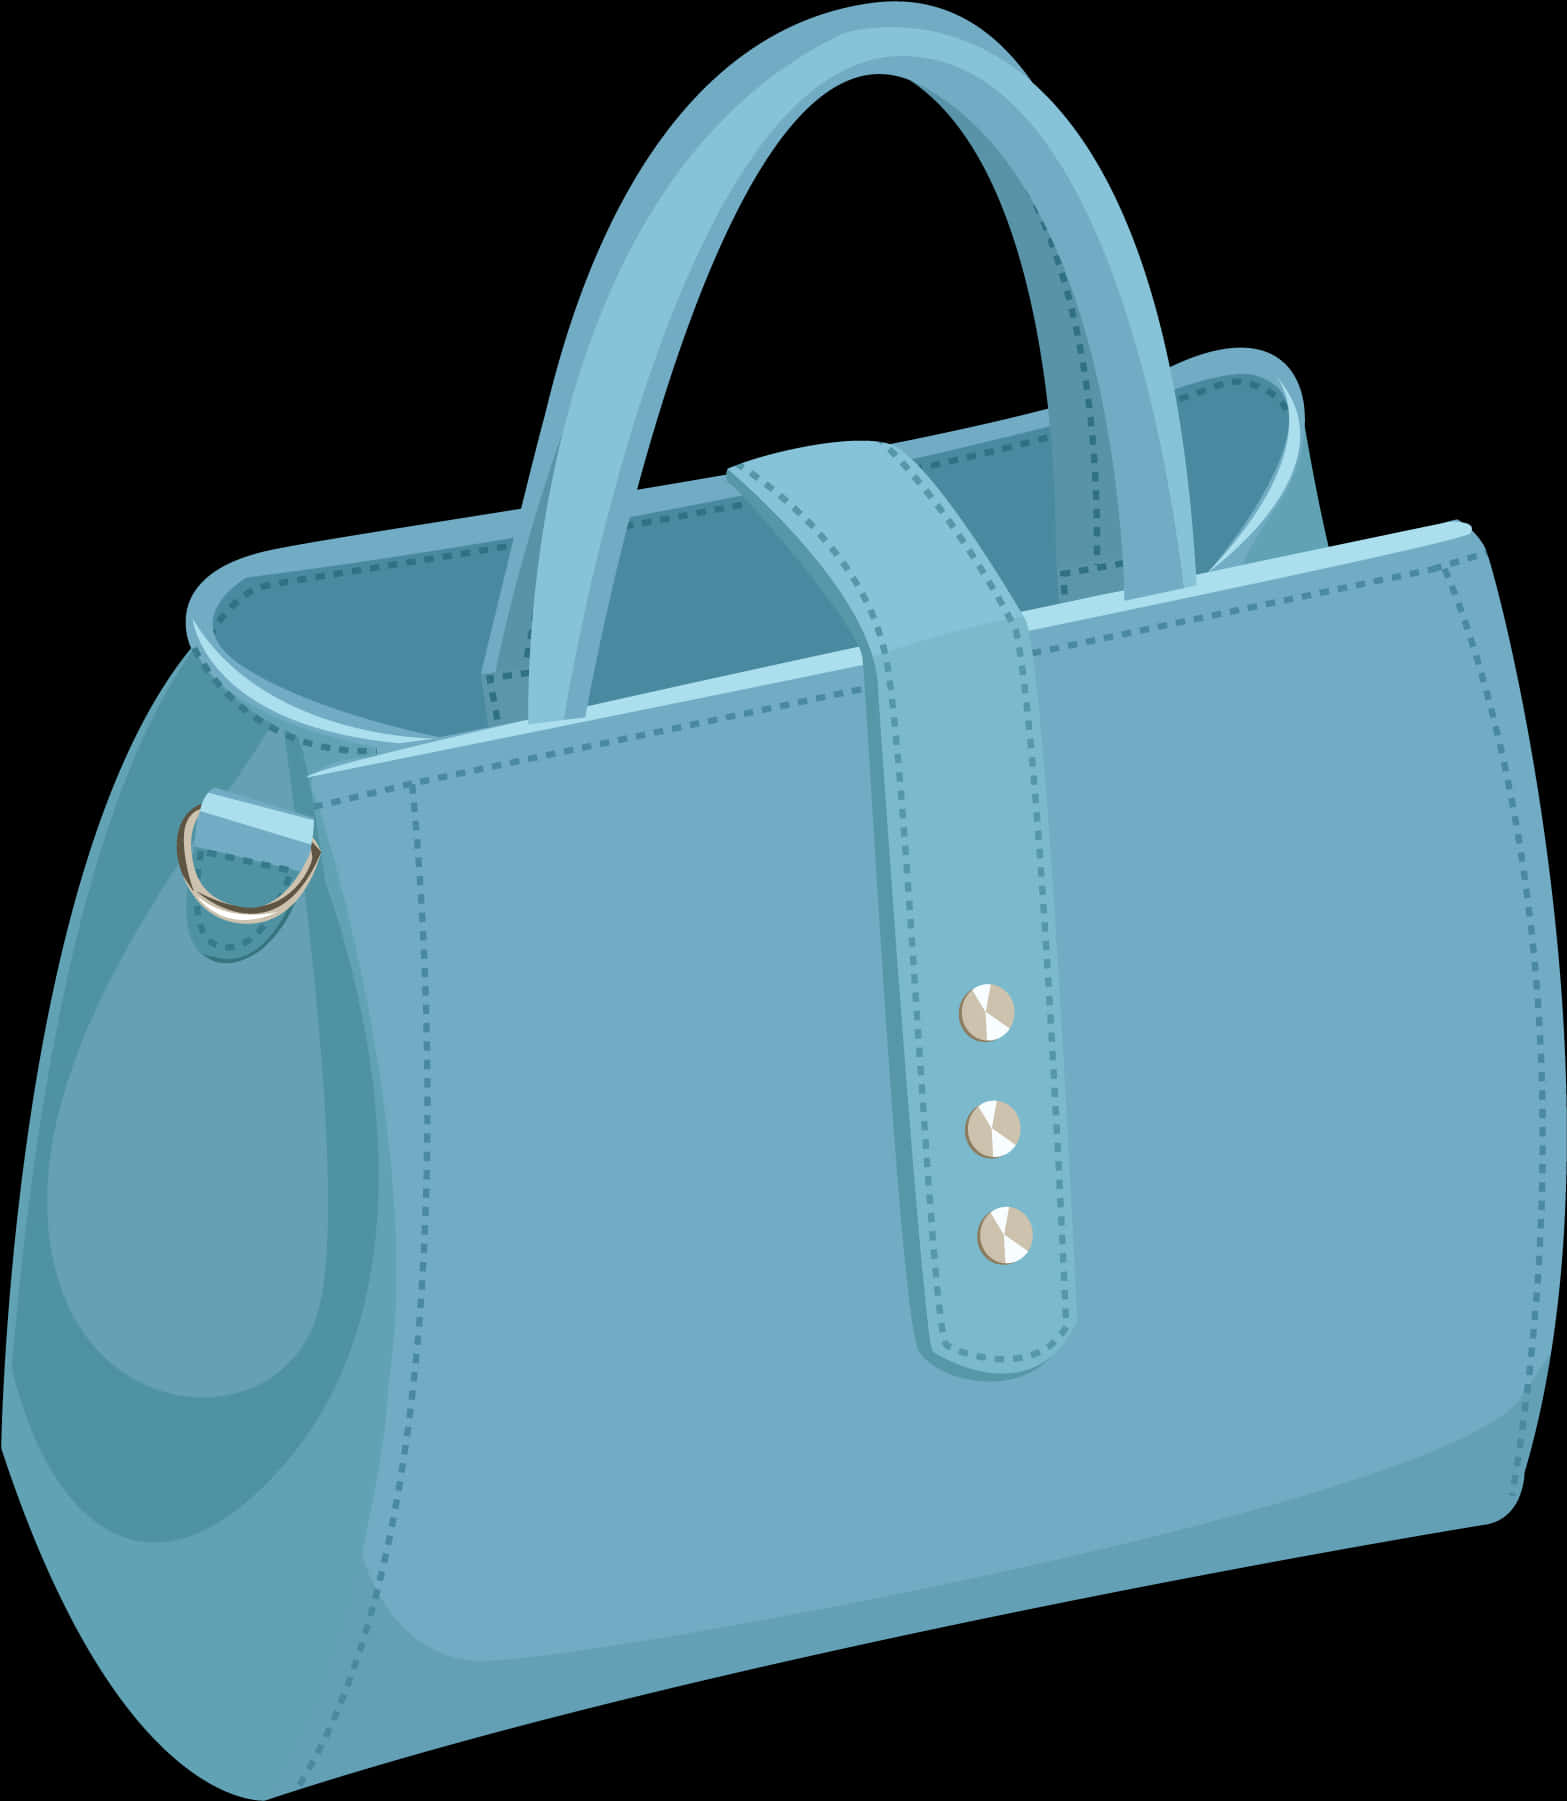 A Blue Purse With Silver Handles